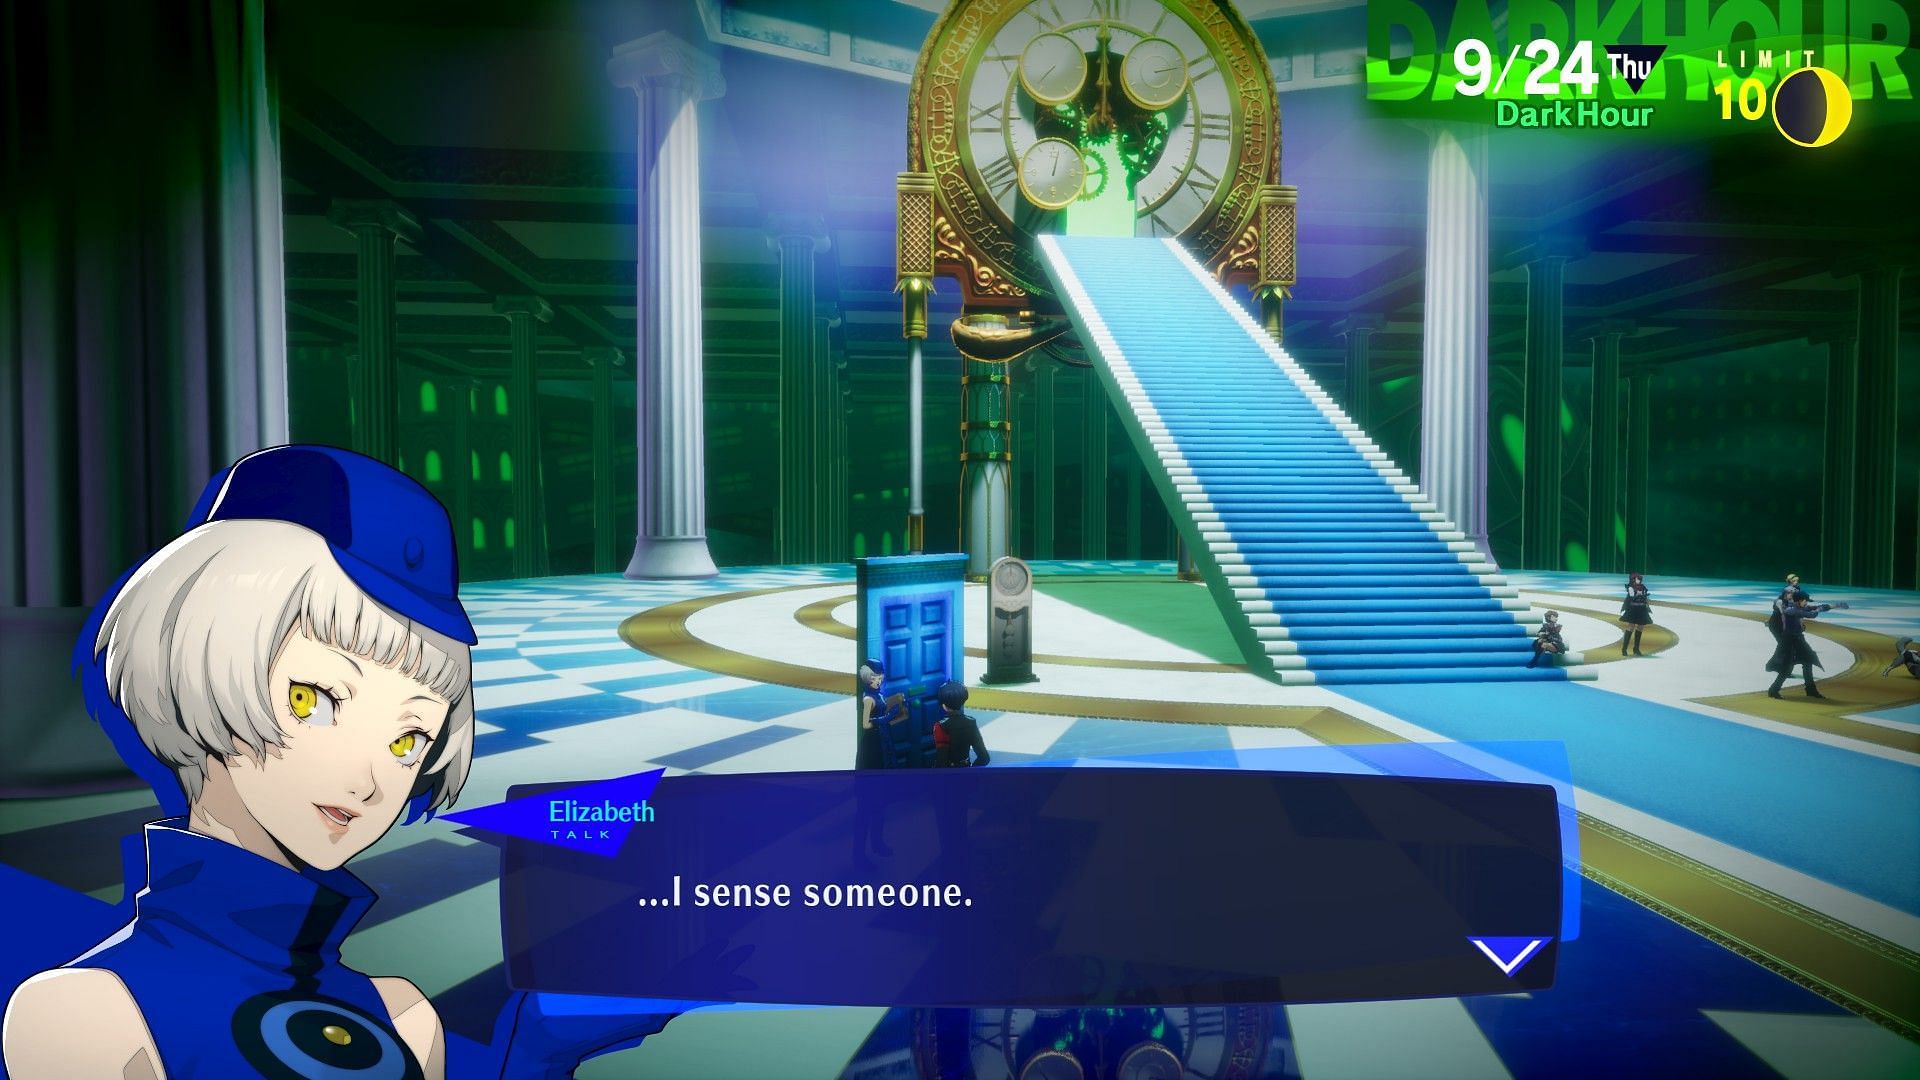 Elizabeth will give you an approximate location you should search (Image via Atlus)